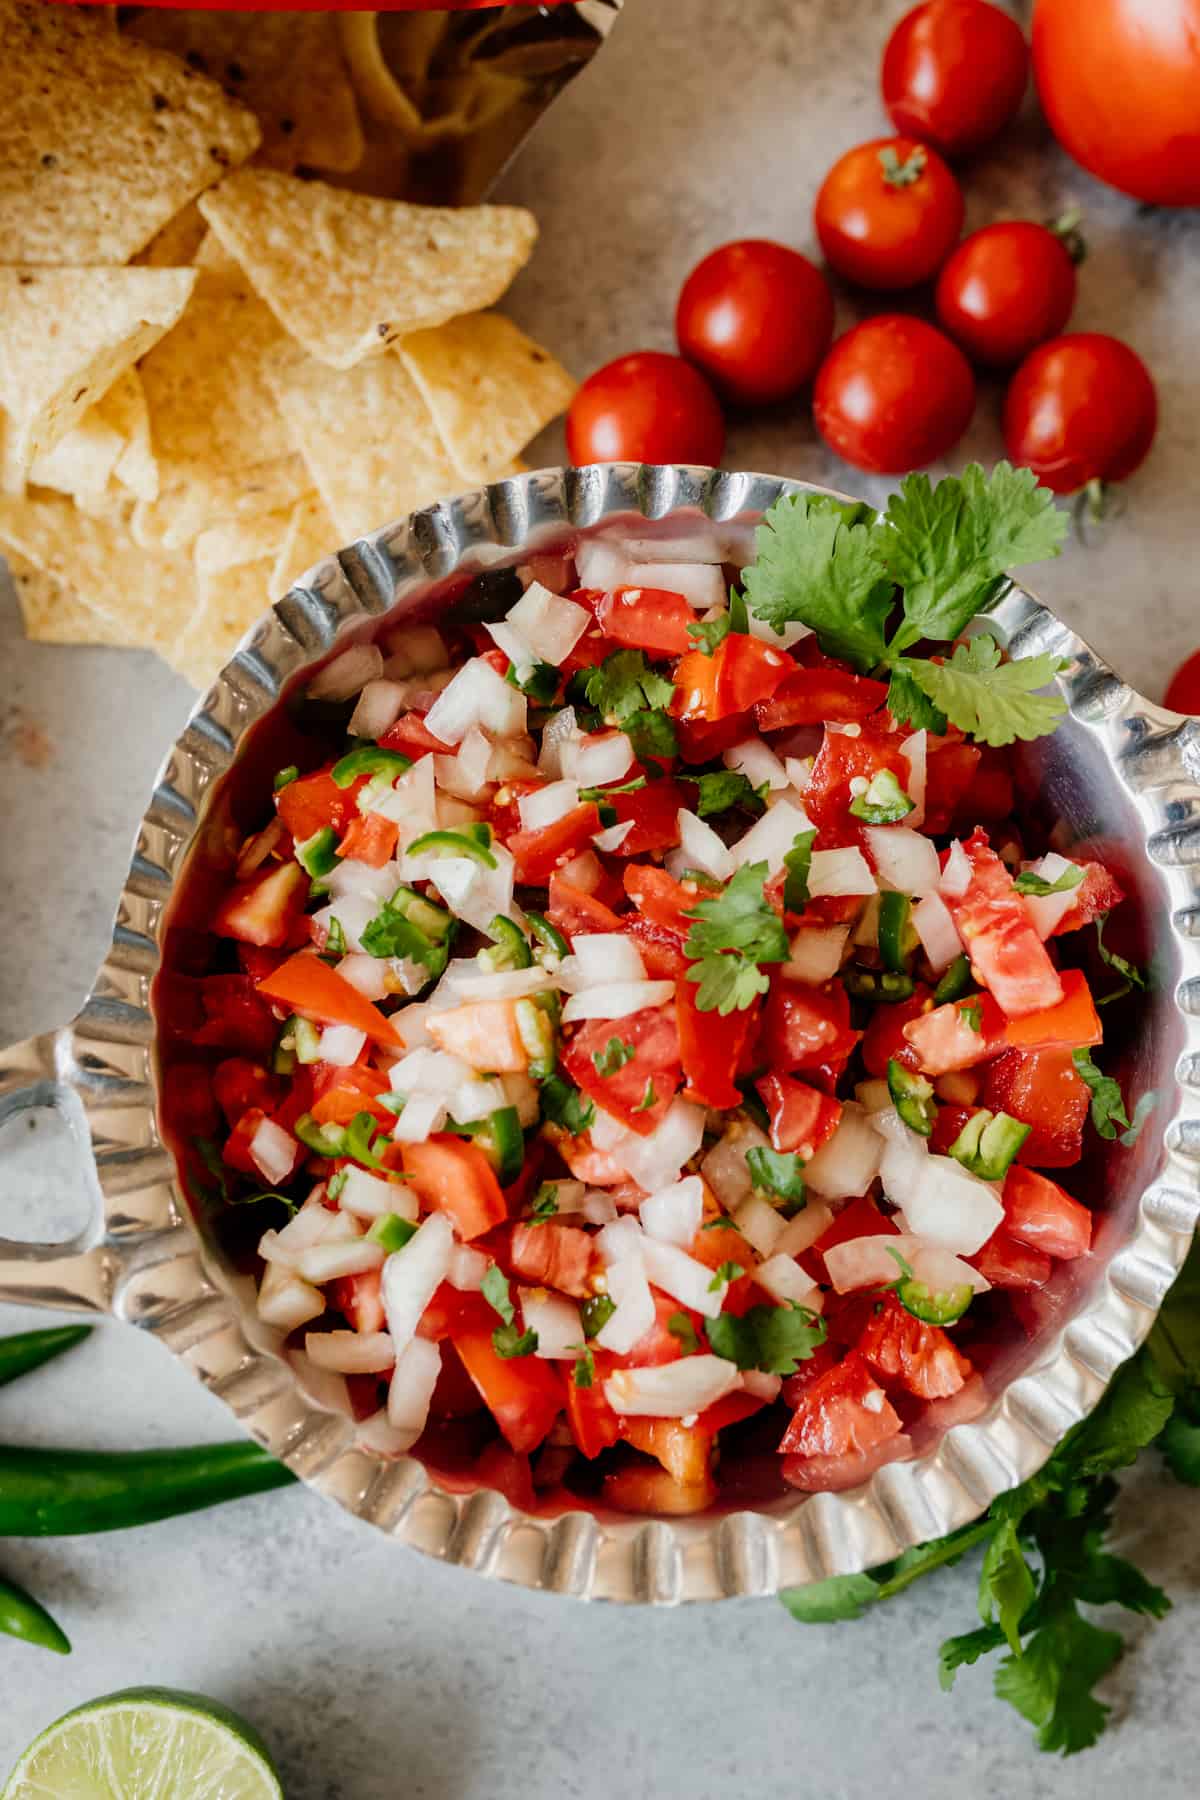 A prepared easy Pico de Gallo recipe served in a large silver bowl with tortilla chips and remaining chopped tomato salad ingredients placed around it